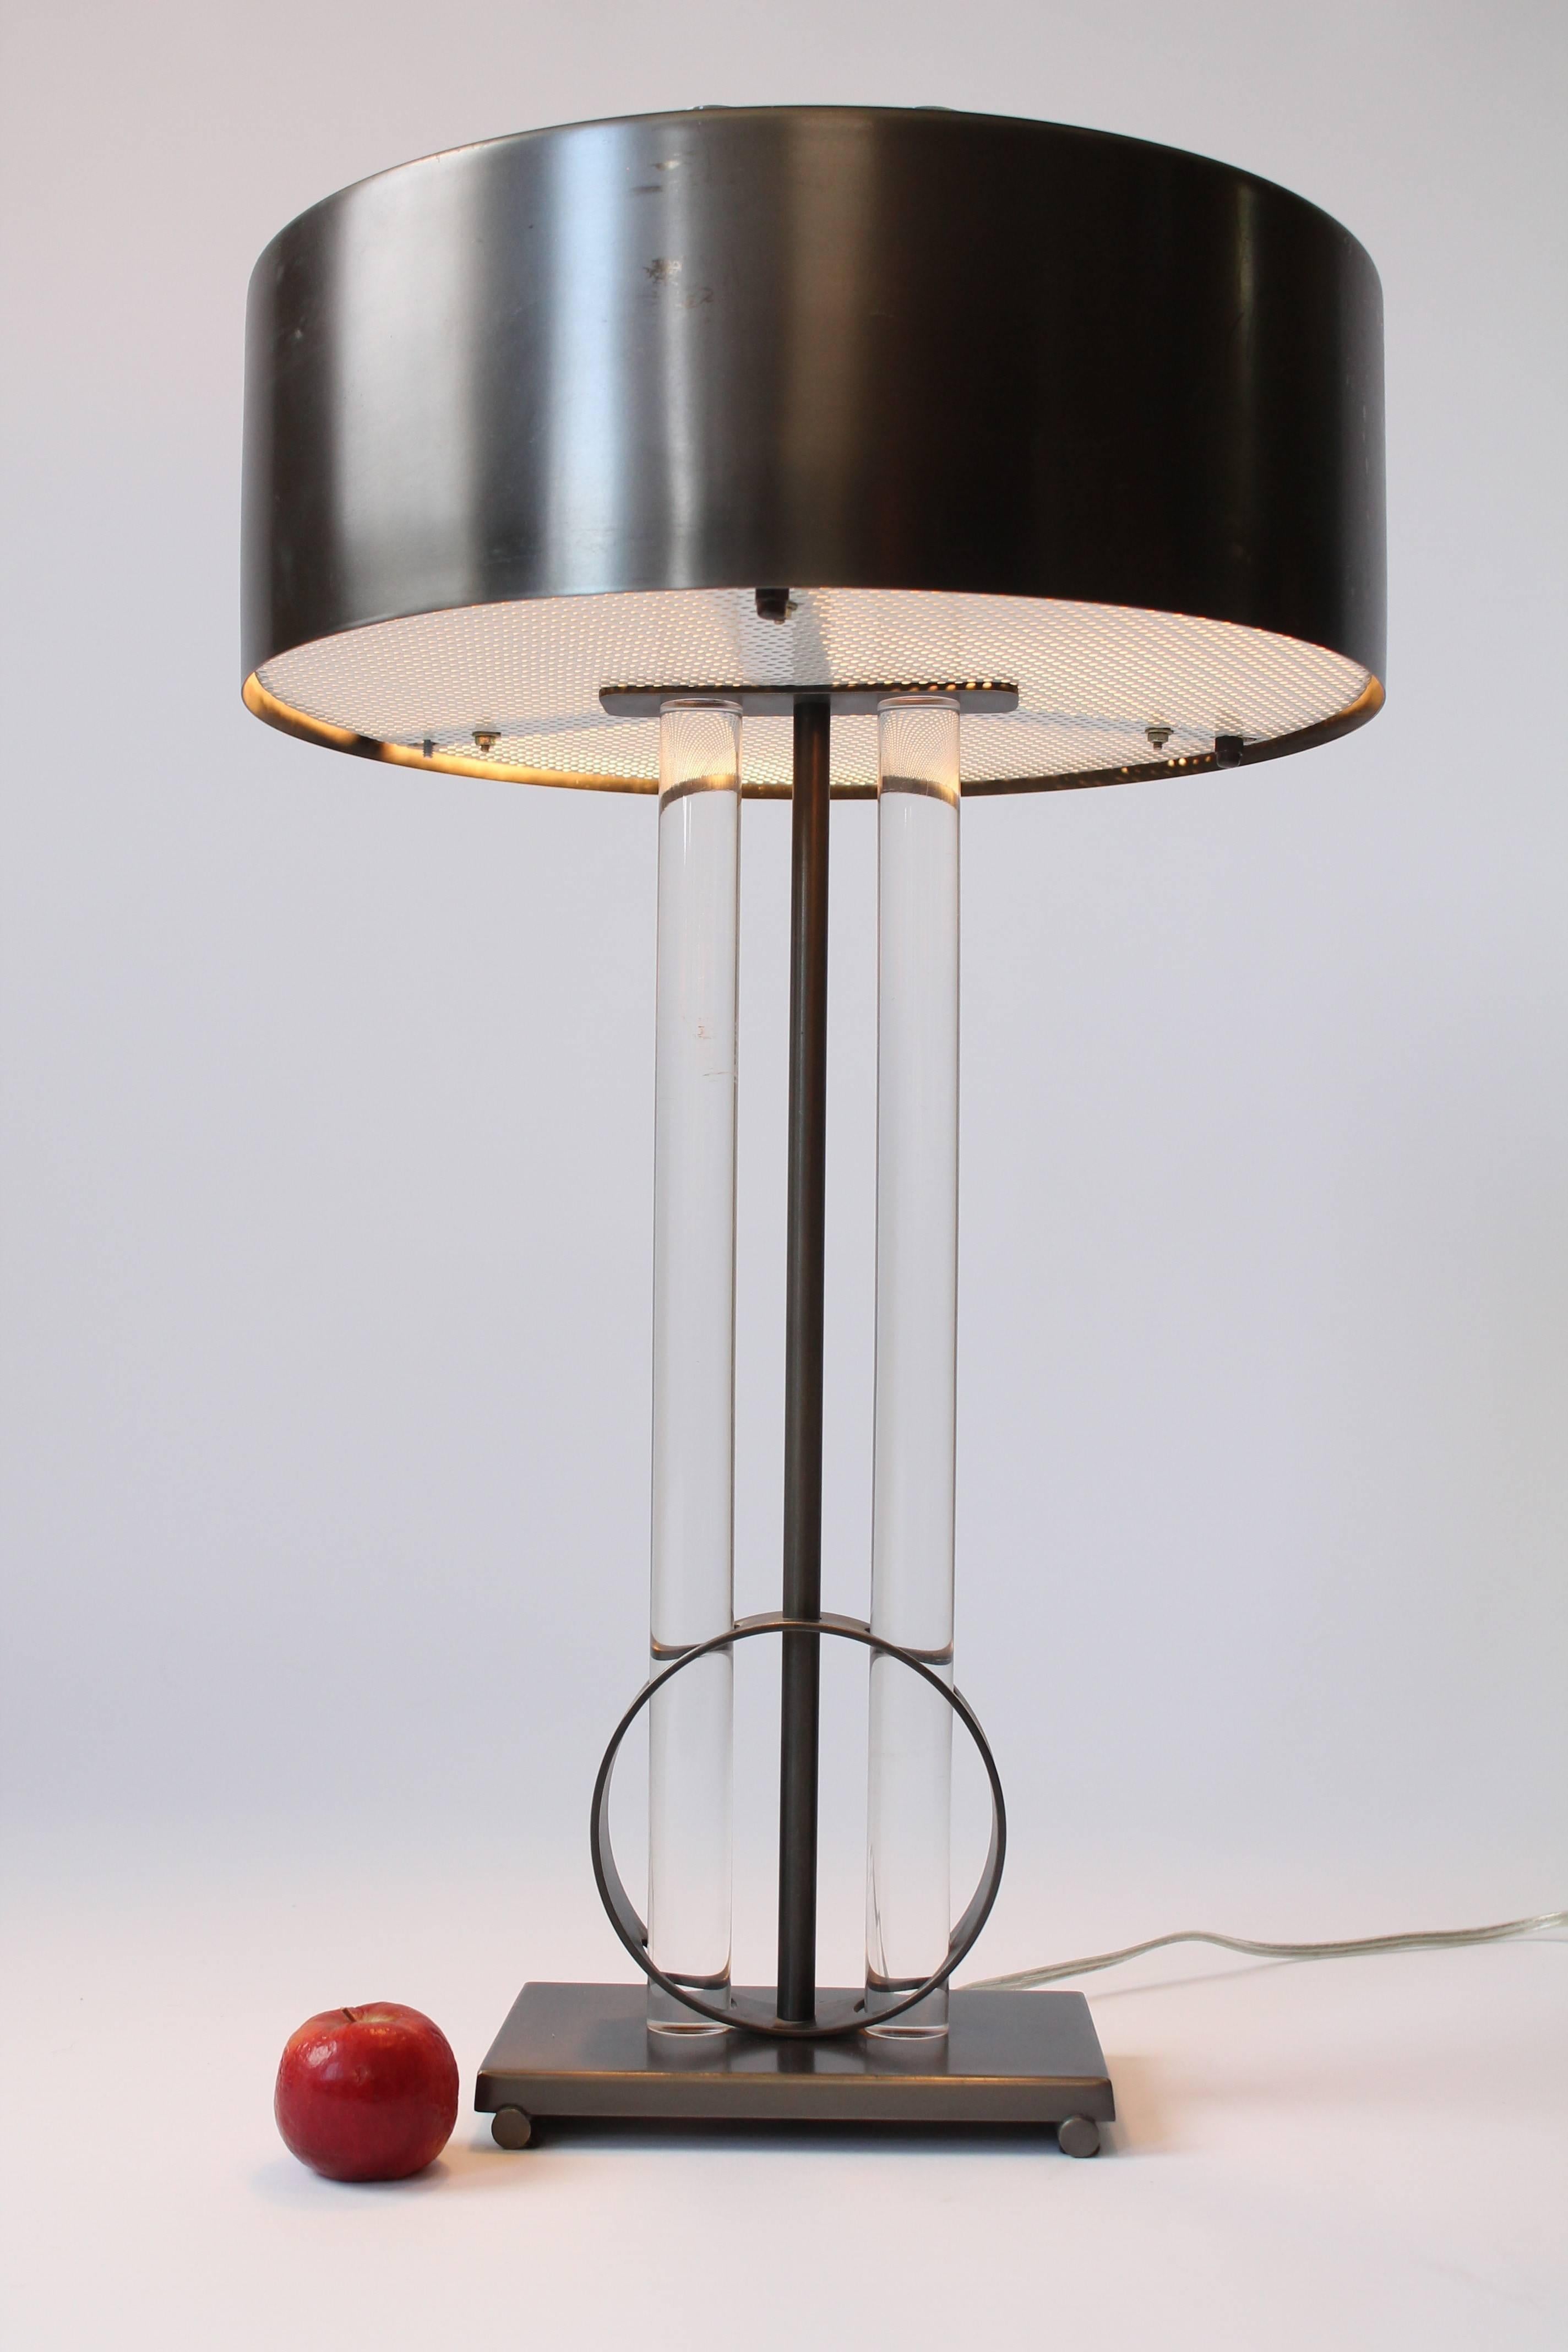 Lacquered raw steel shade and base, thick Lucite stem, fully pierced enameled metal diffuser under.

Massive in size, weight and presence. 

Extremely solid, well made construction.

Two E26 regular size socket.

Measures: 27 inches high by 15